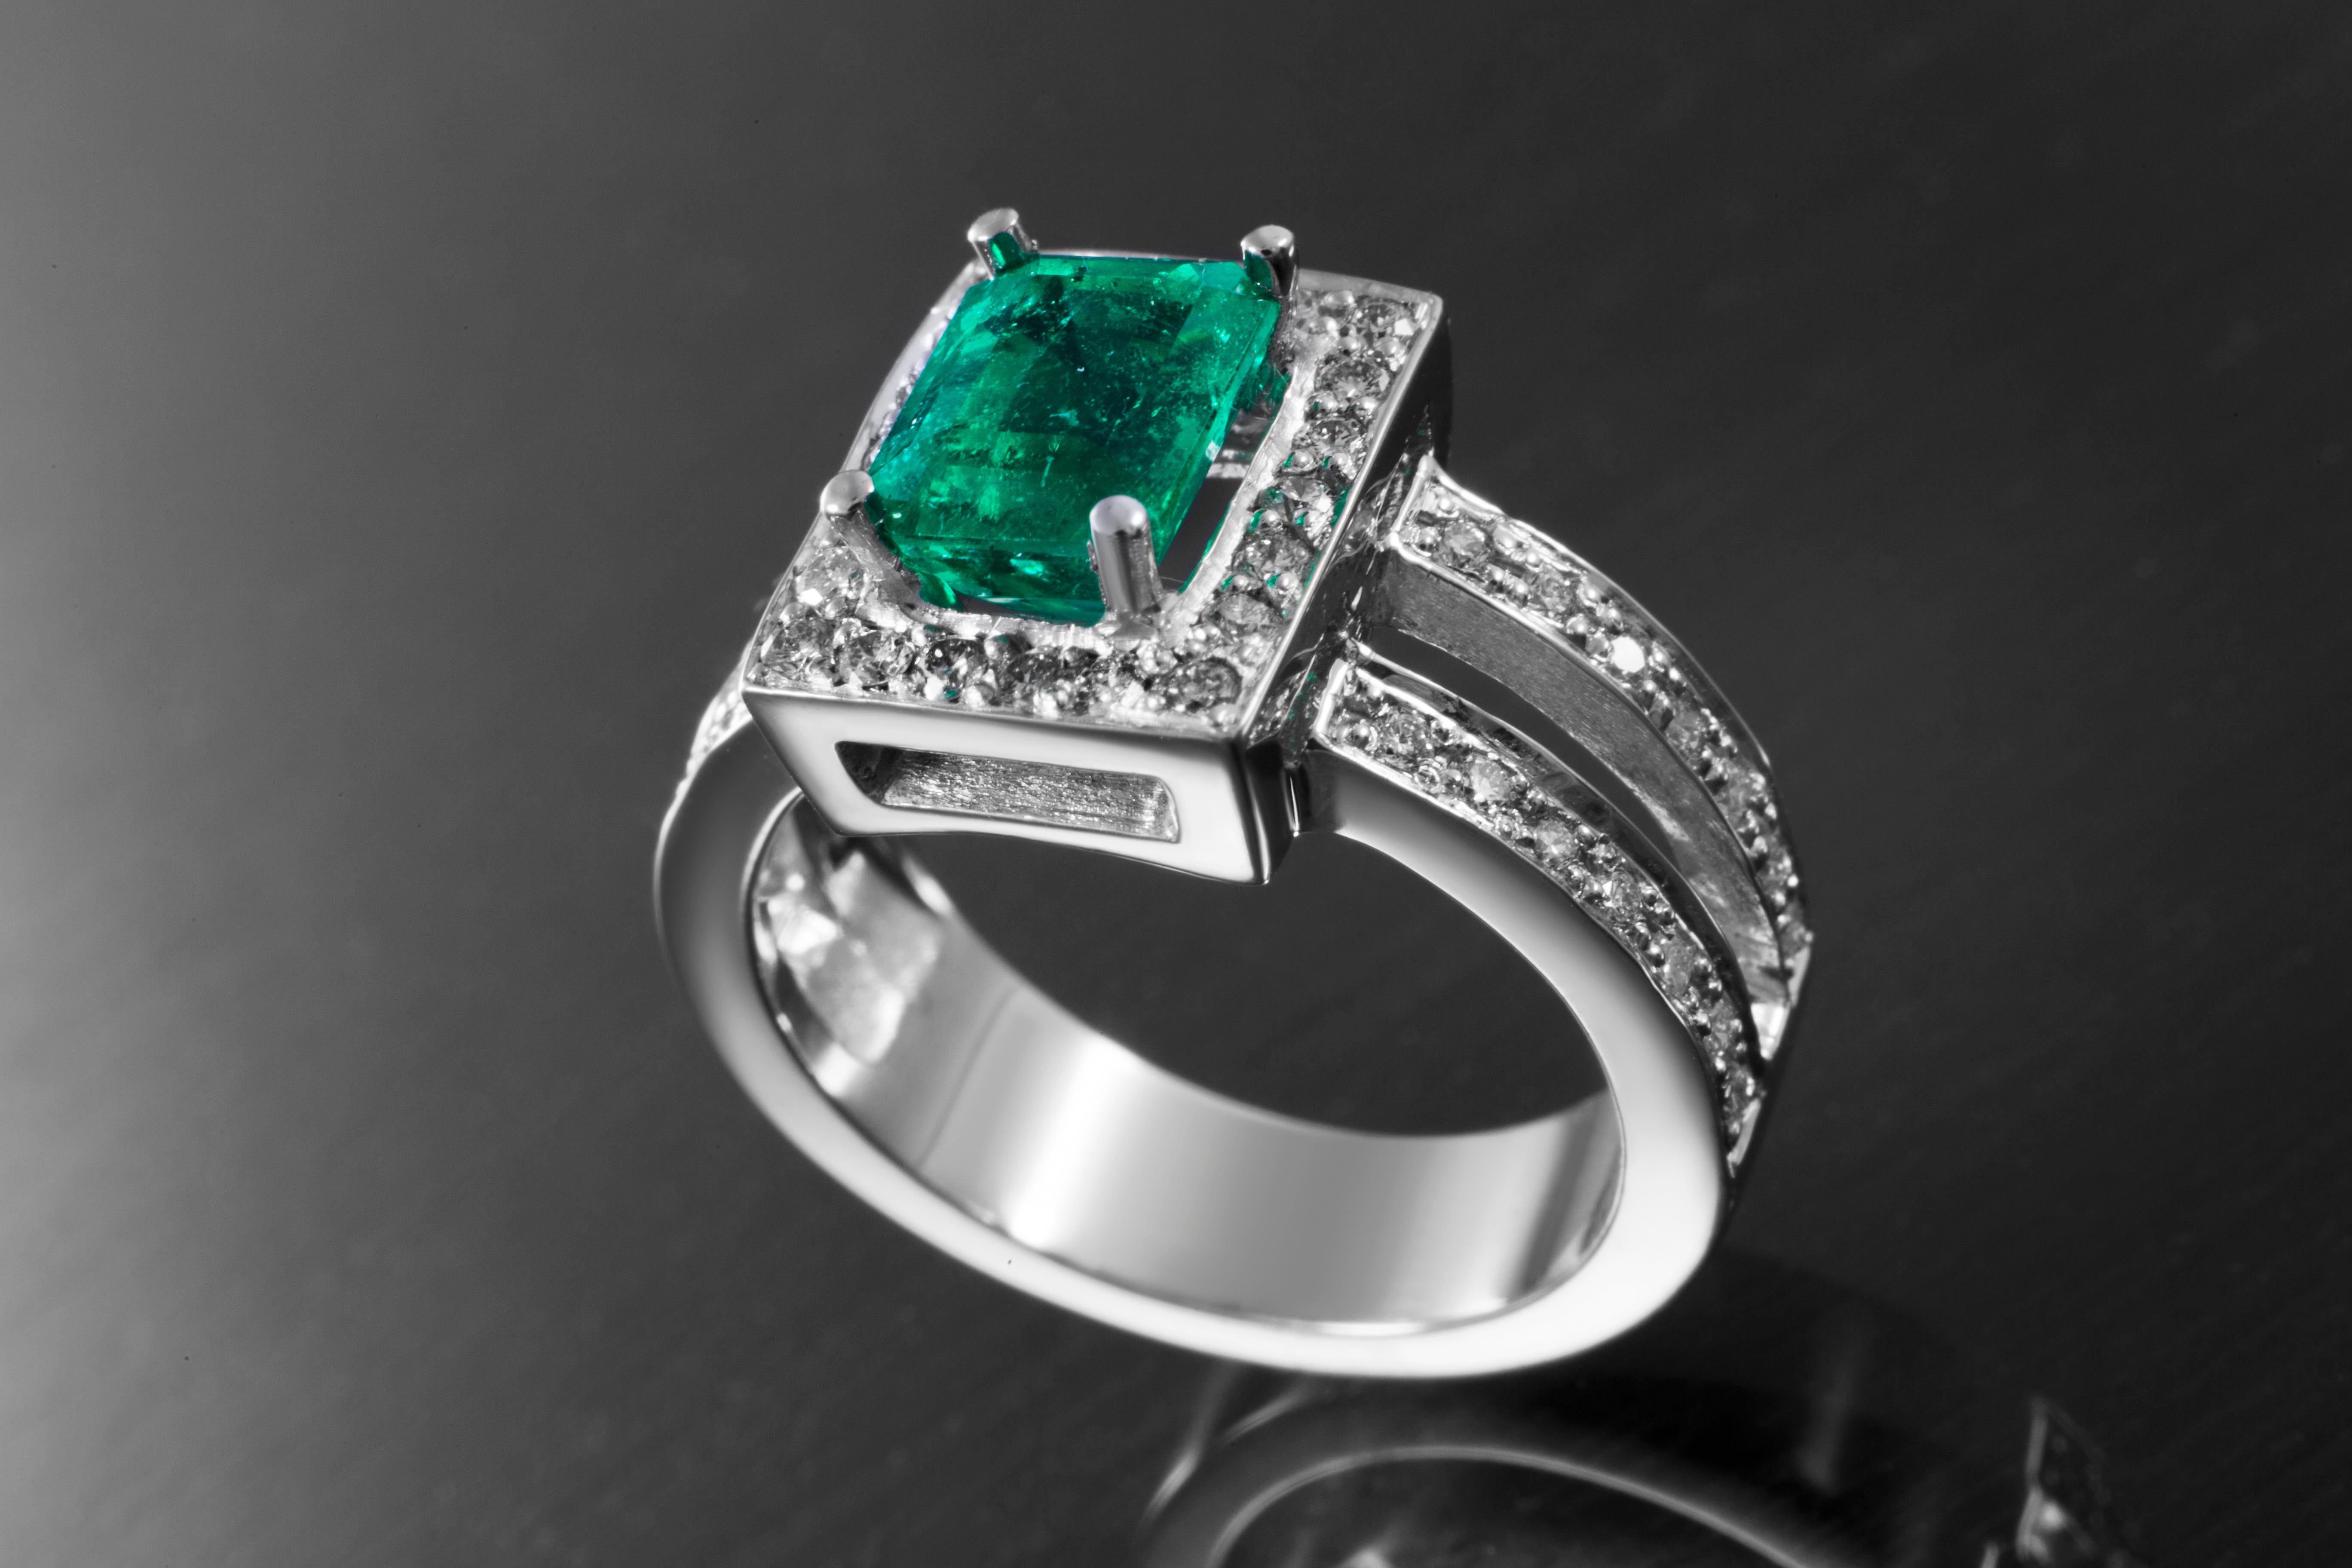 This ring contains a 1.77 carat certified F1 quality Colombian Muzo emerald centre stone, set in 18 carat white gold with a diamond melee containing 50 stones of brilliant cut, 0.5 carats total, H-I colour.  

Certified by CDTEC gemological